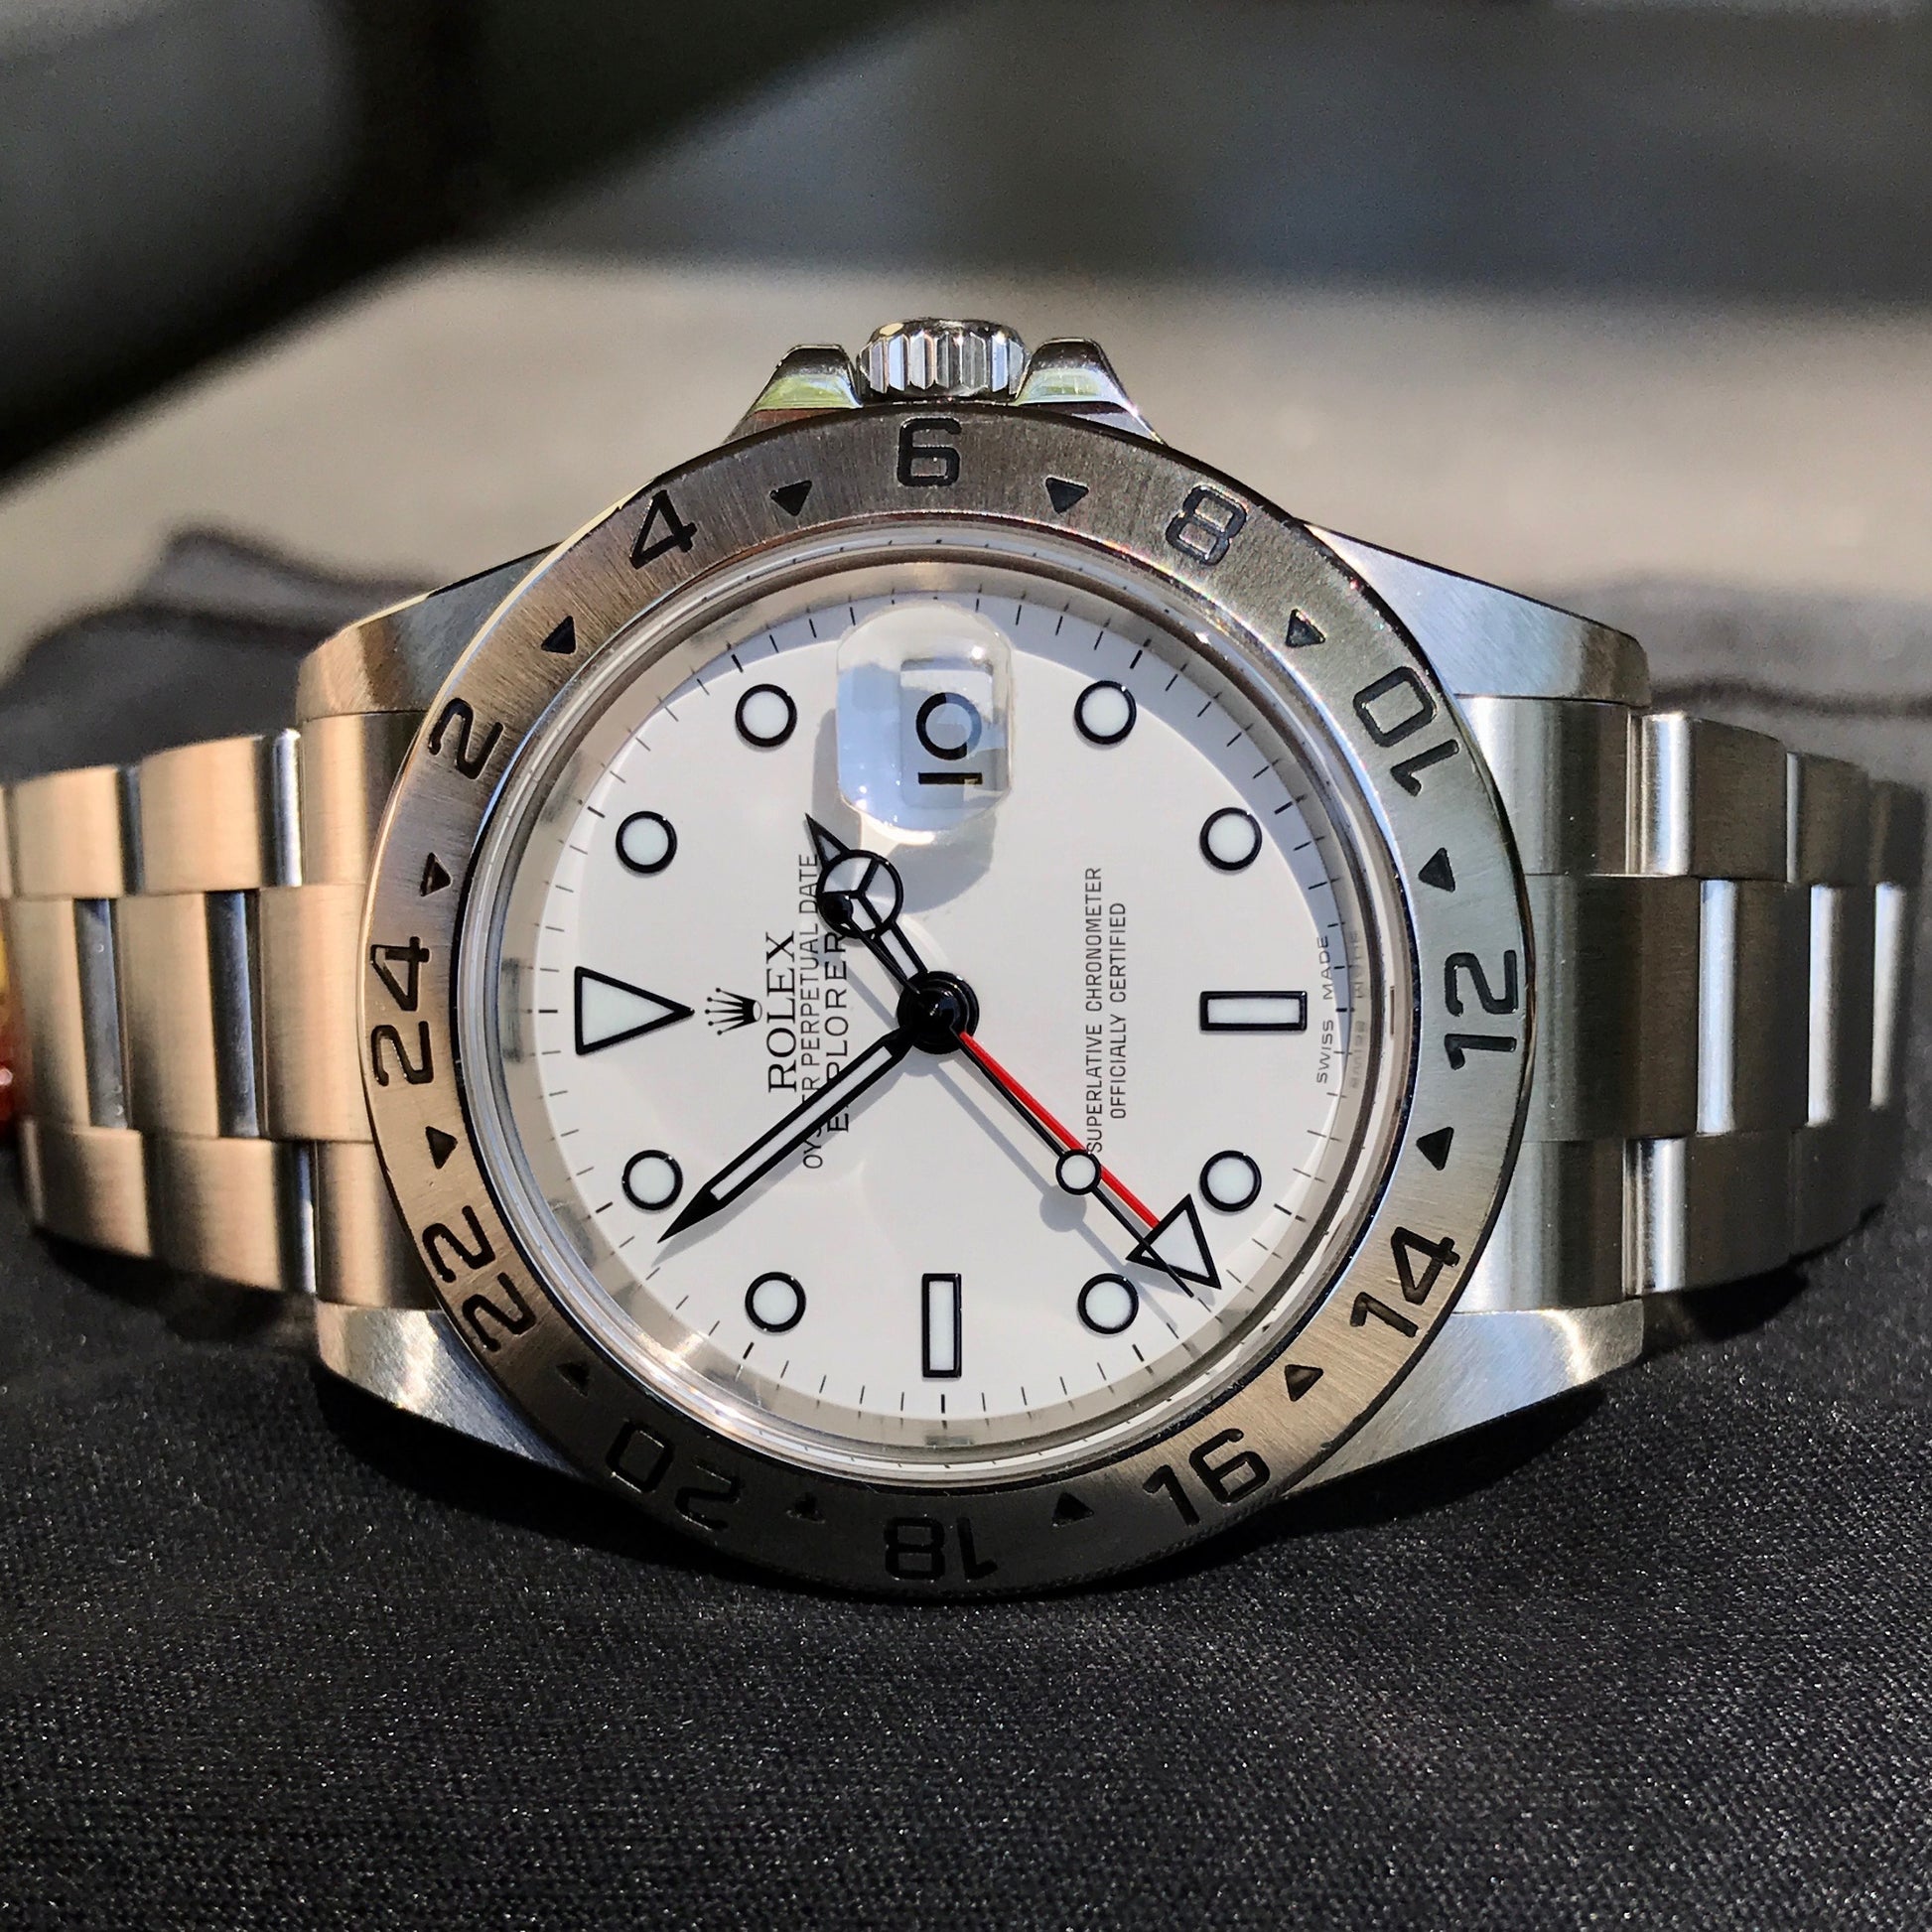 Rolex Explorer II 16570 Stainless Steel GMT Oyster "Z" Serial No Holes Automatic Wristwatch Box & Papers - Hashtag Watch Company